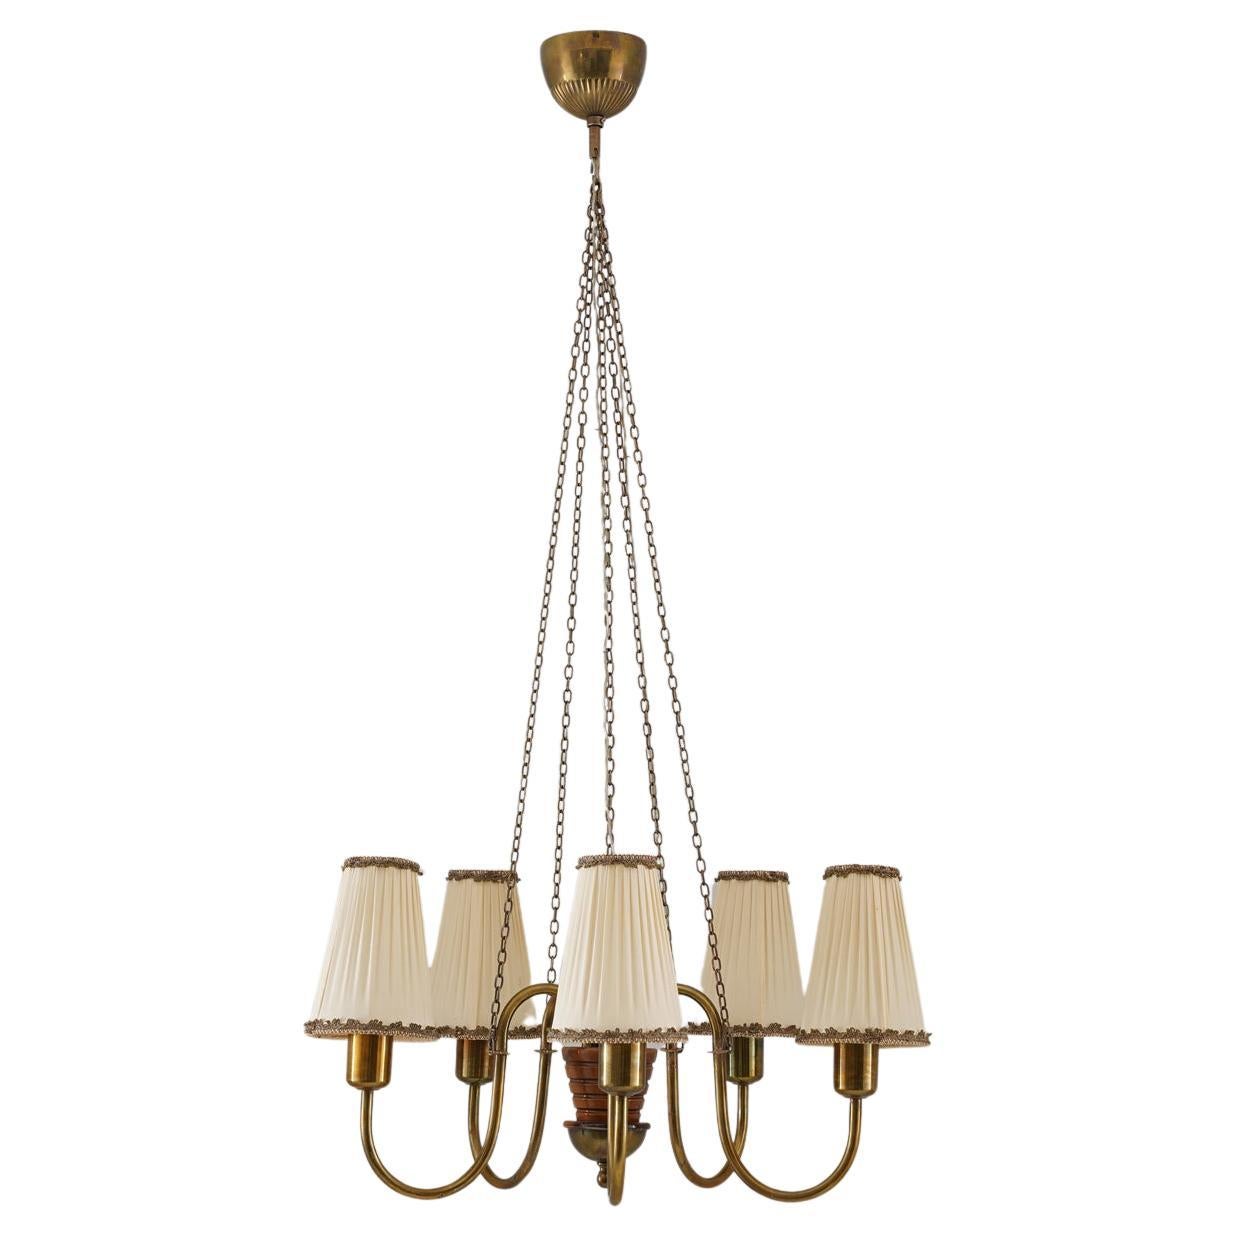 Swedish Modern Chandelier in Brass and Wood, 1940s